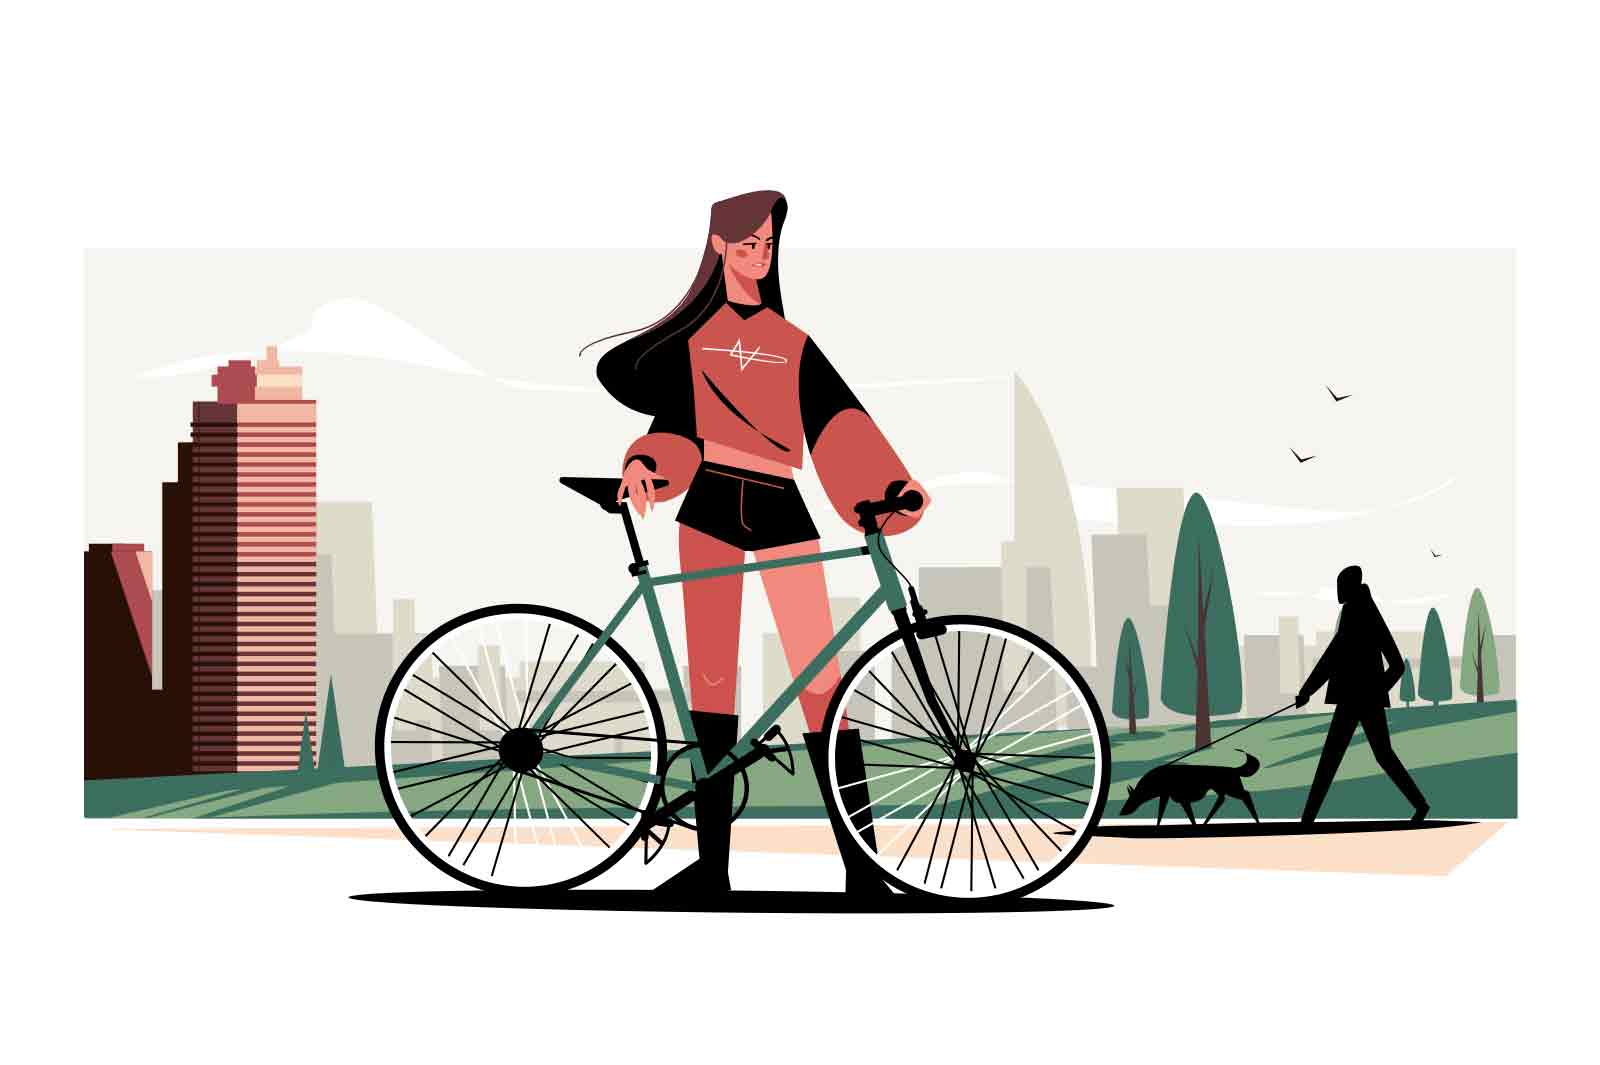 Young woman pose with bike in city park vector illustration. Sportswoman on evening ride flat style. Hobby, leisure, sport lifestyle concept